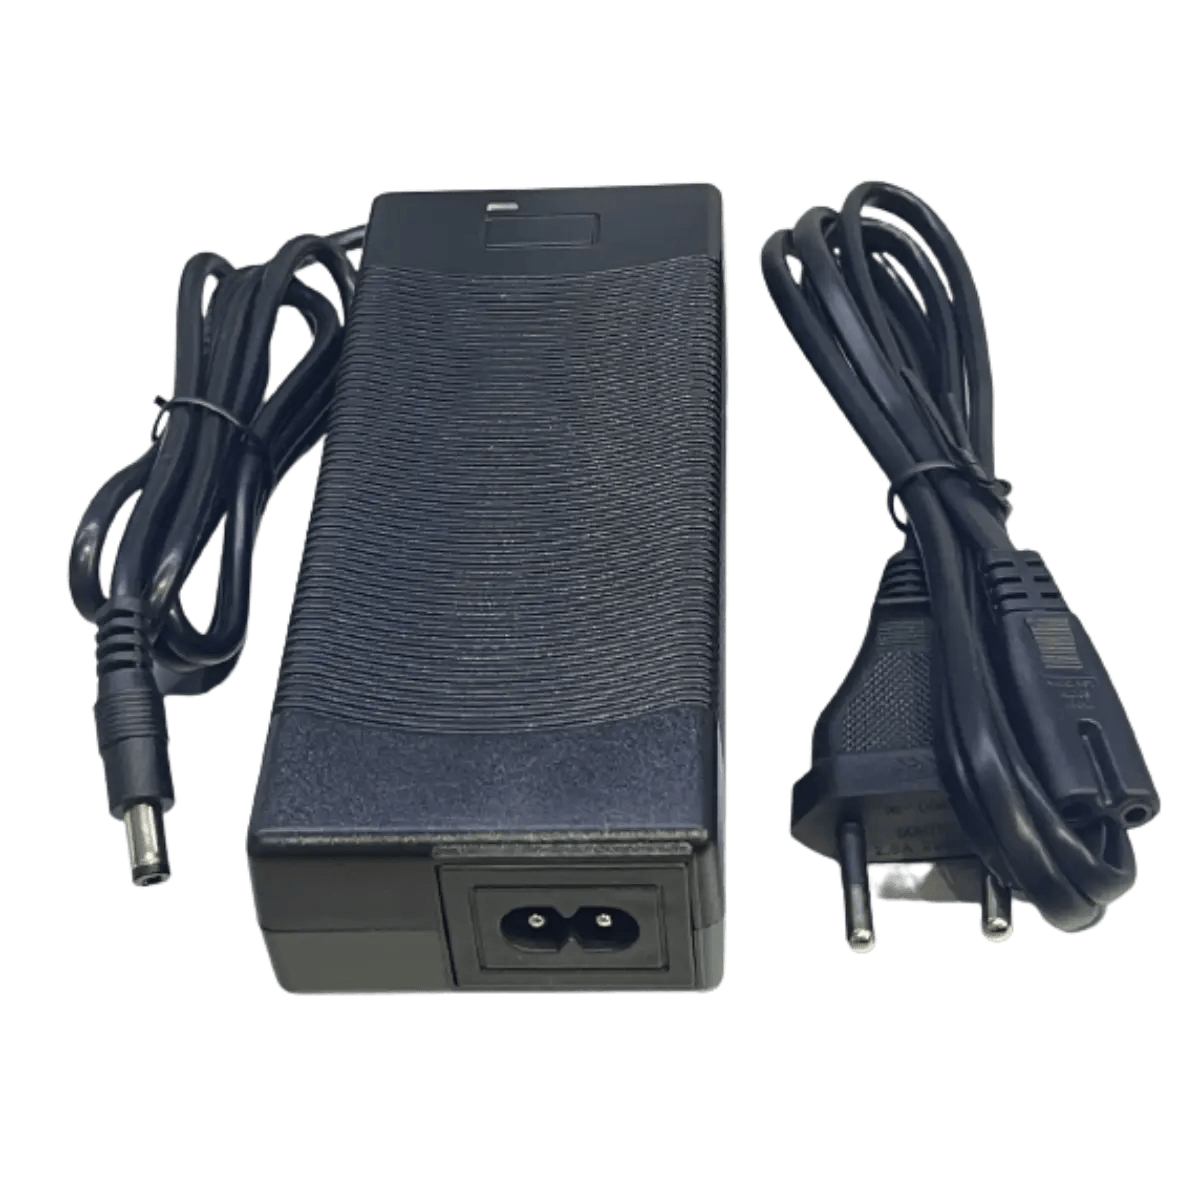 Chargeur Lithium 12.6V 5A